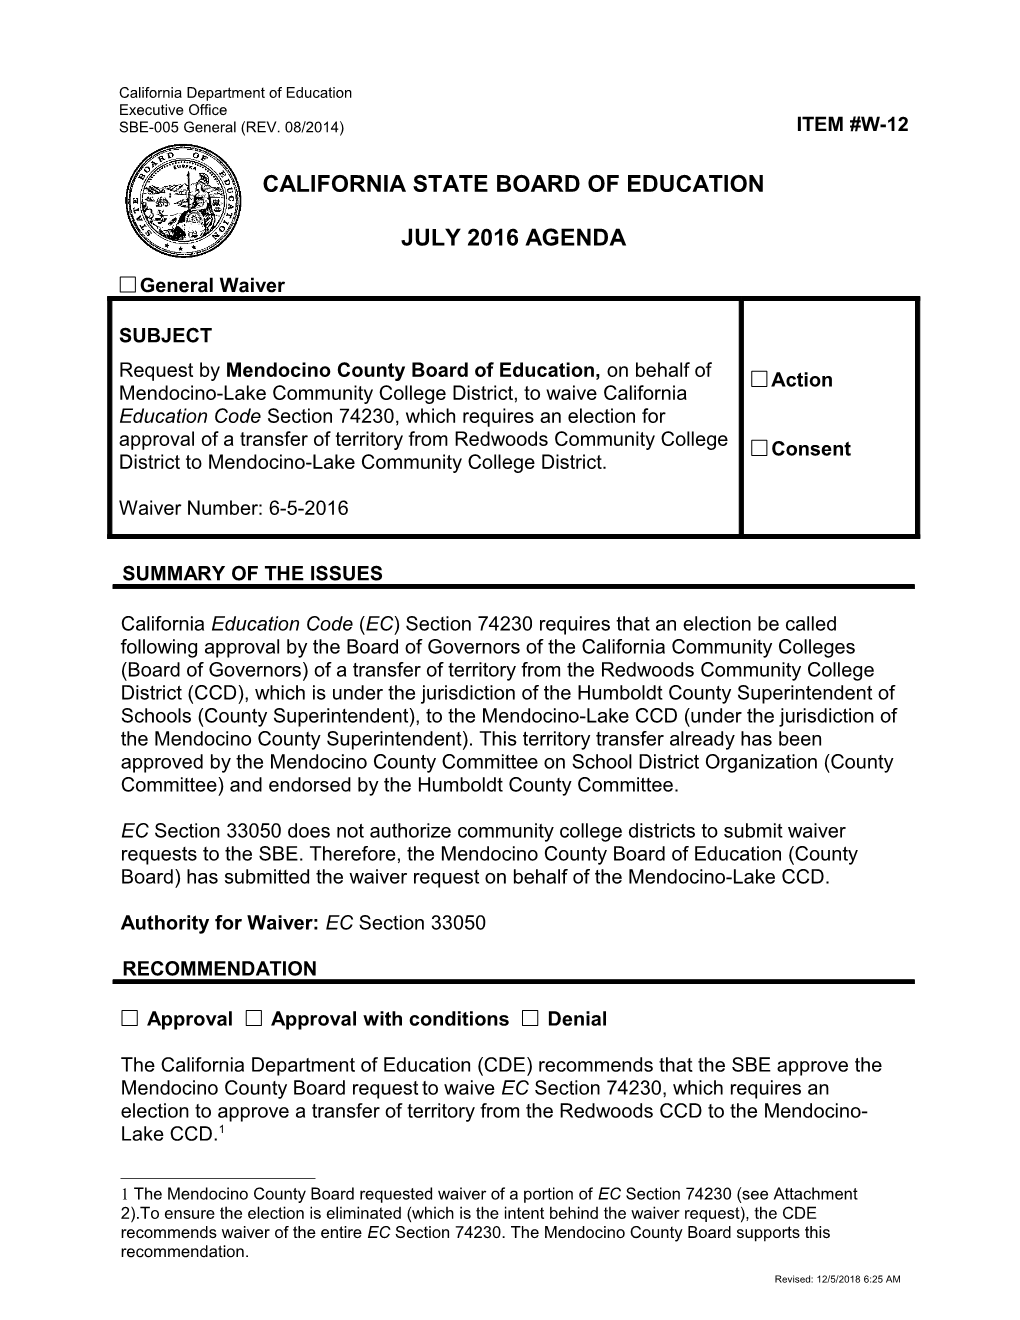 July 2016 Waiver Item W-12 - Meeting Agendas (CA State Board of Education)